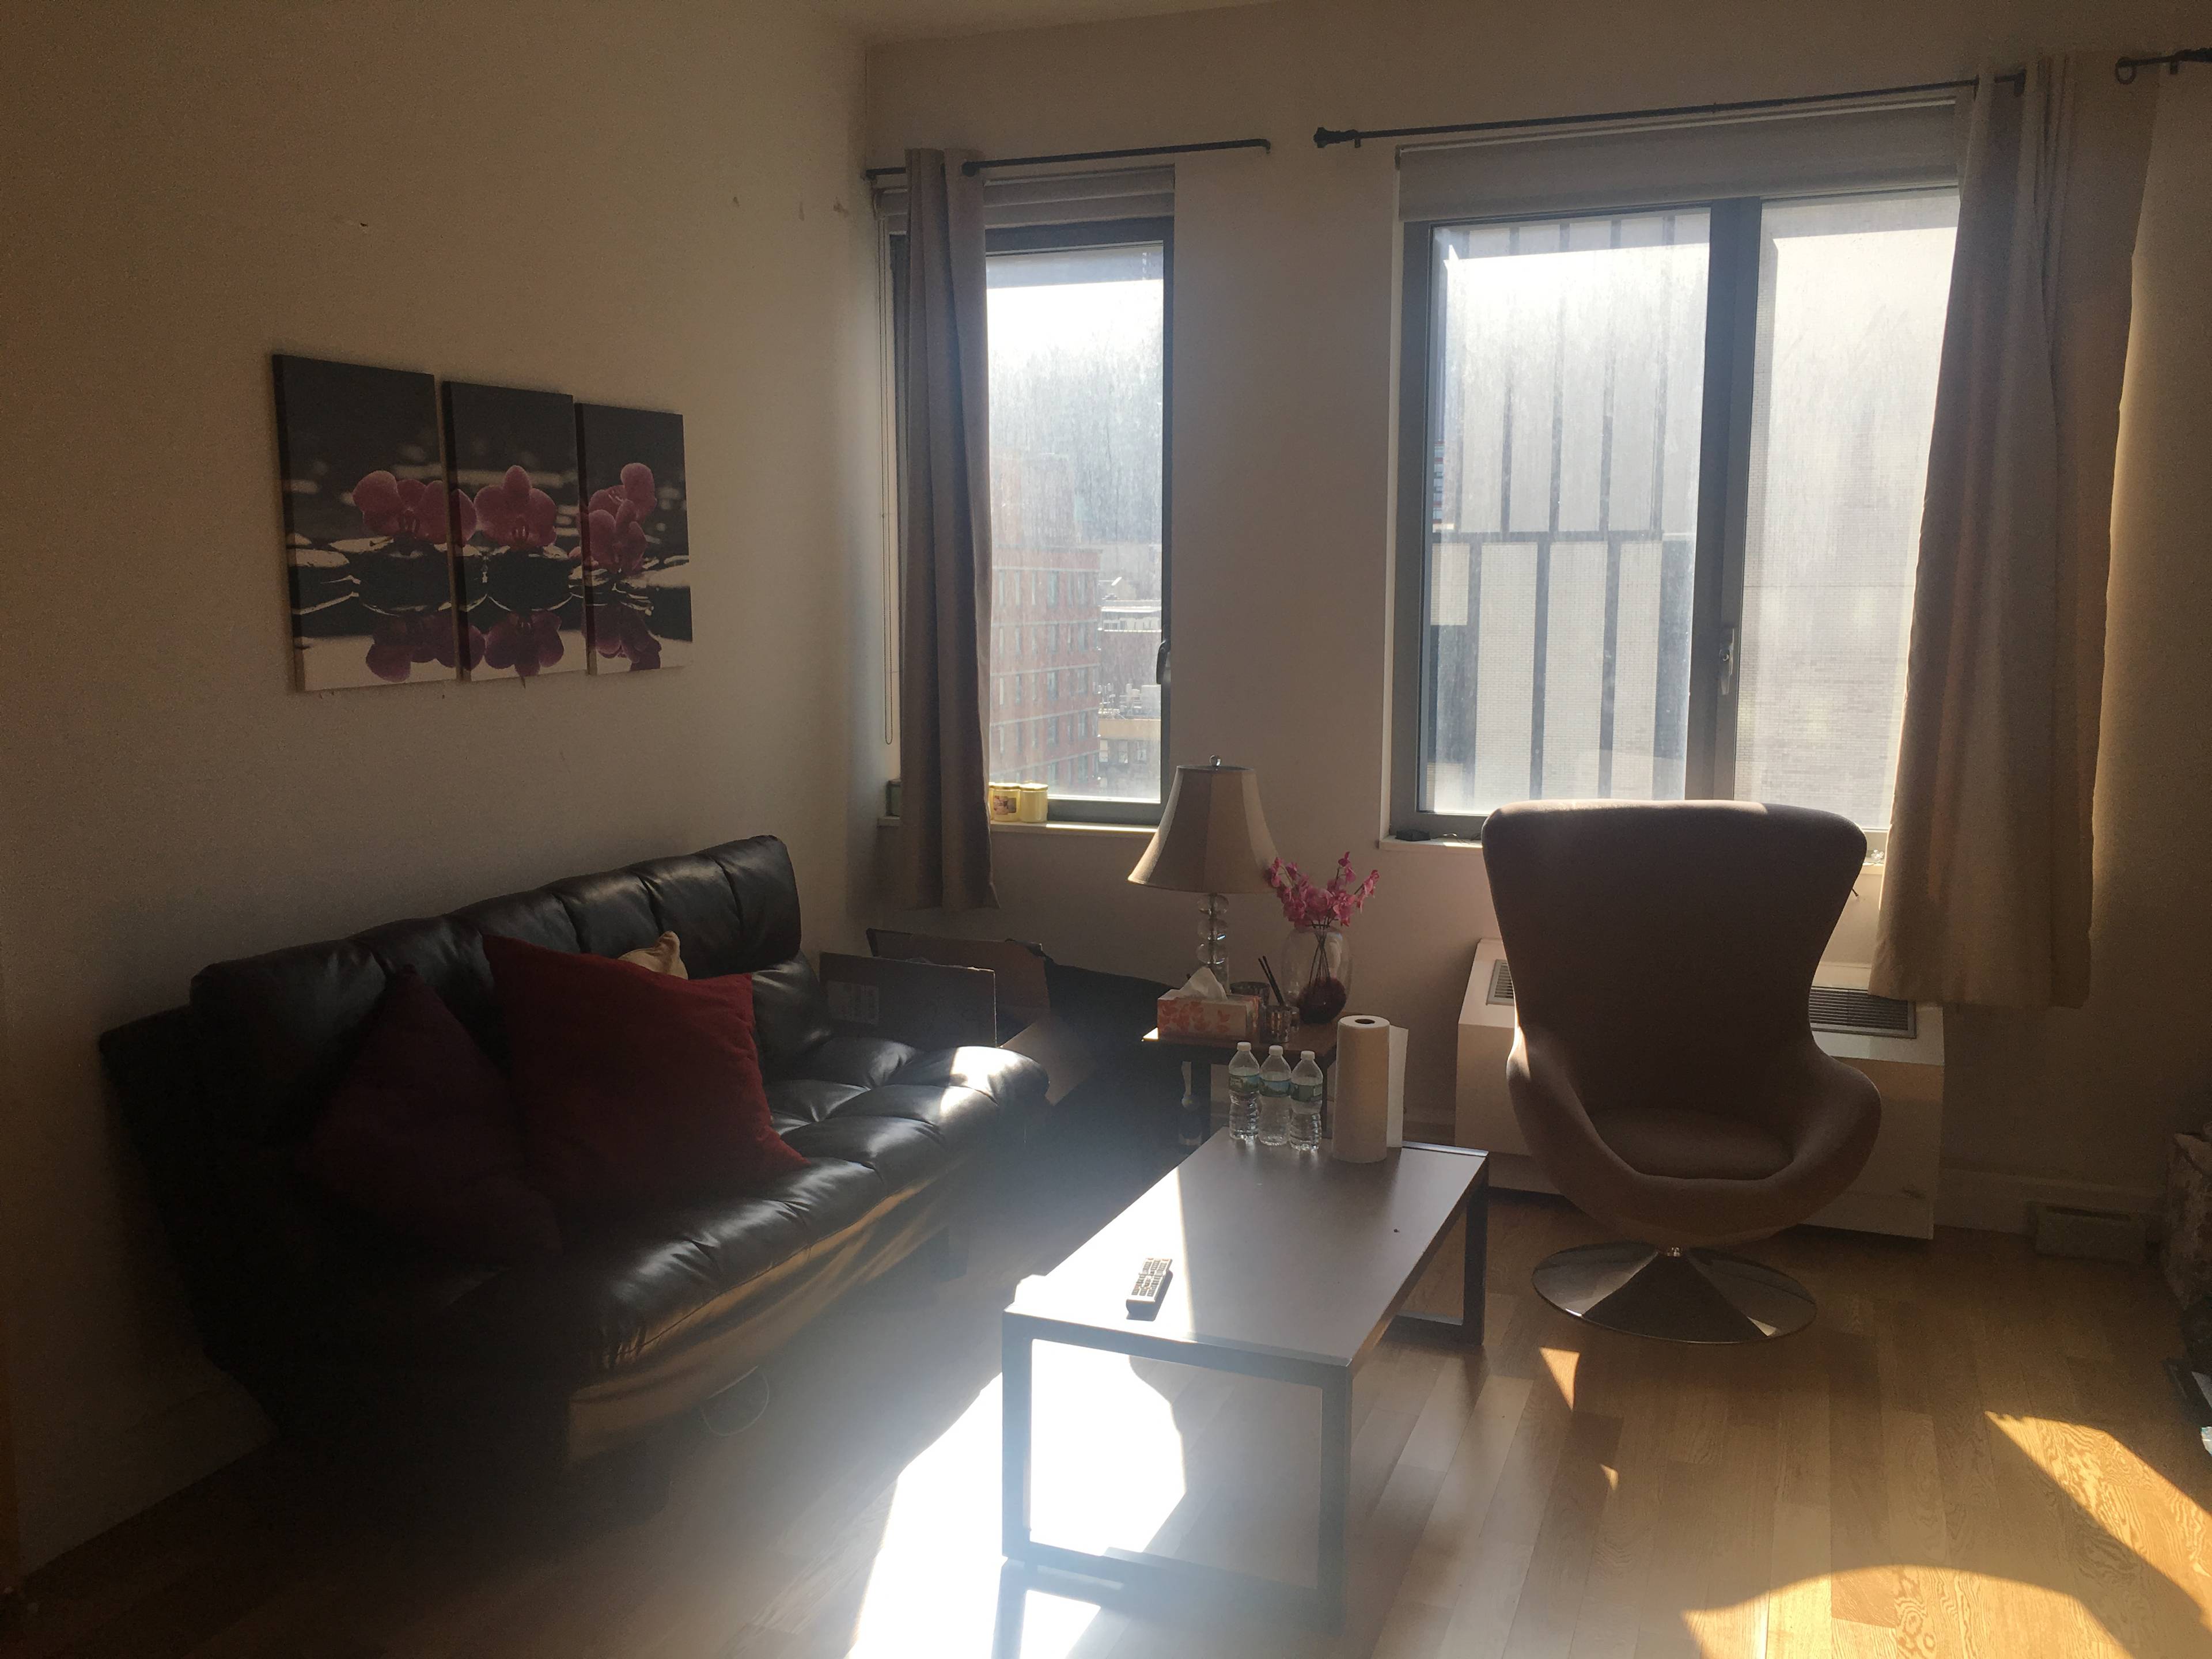 Short term 1 BR * Fully Furnished * W/D in unit, POOL, GYM 24HR Doorman Call Today!!